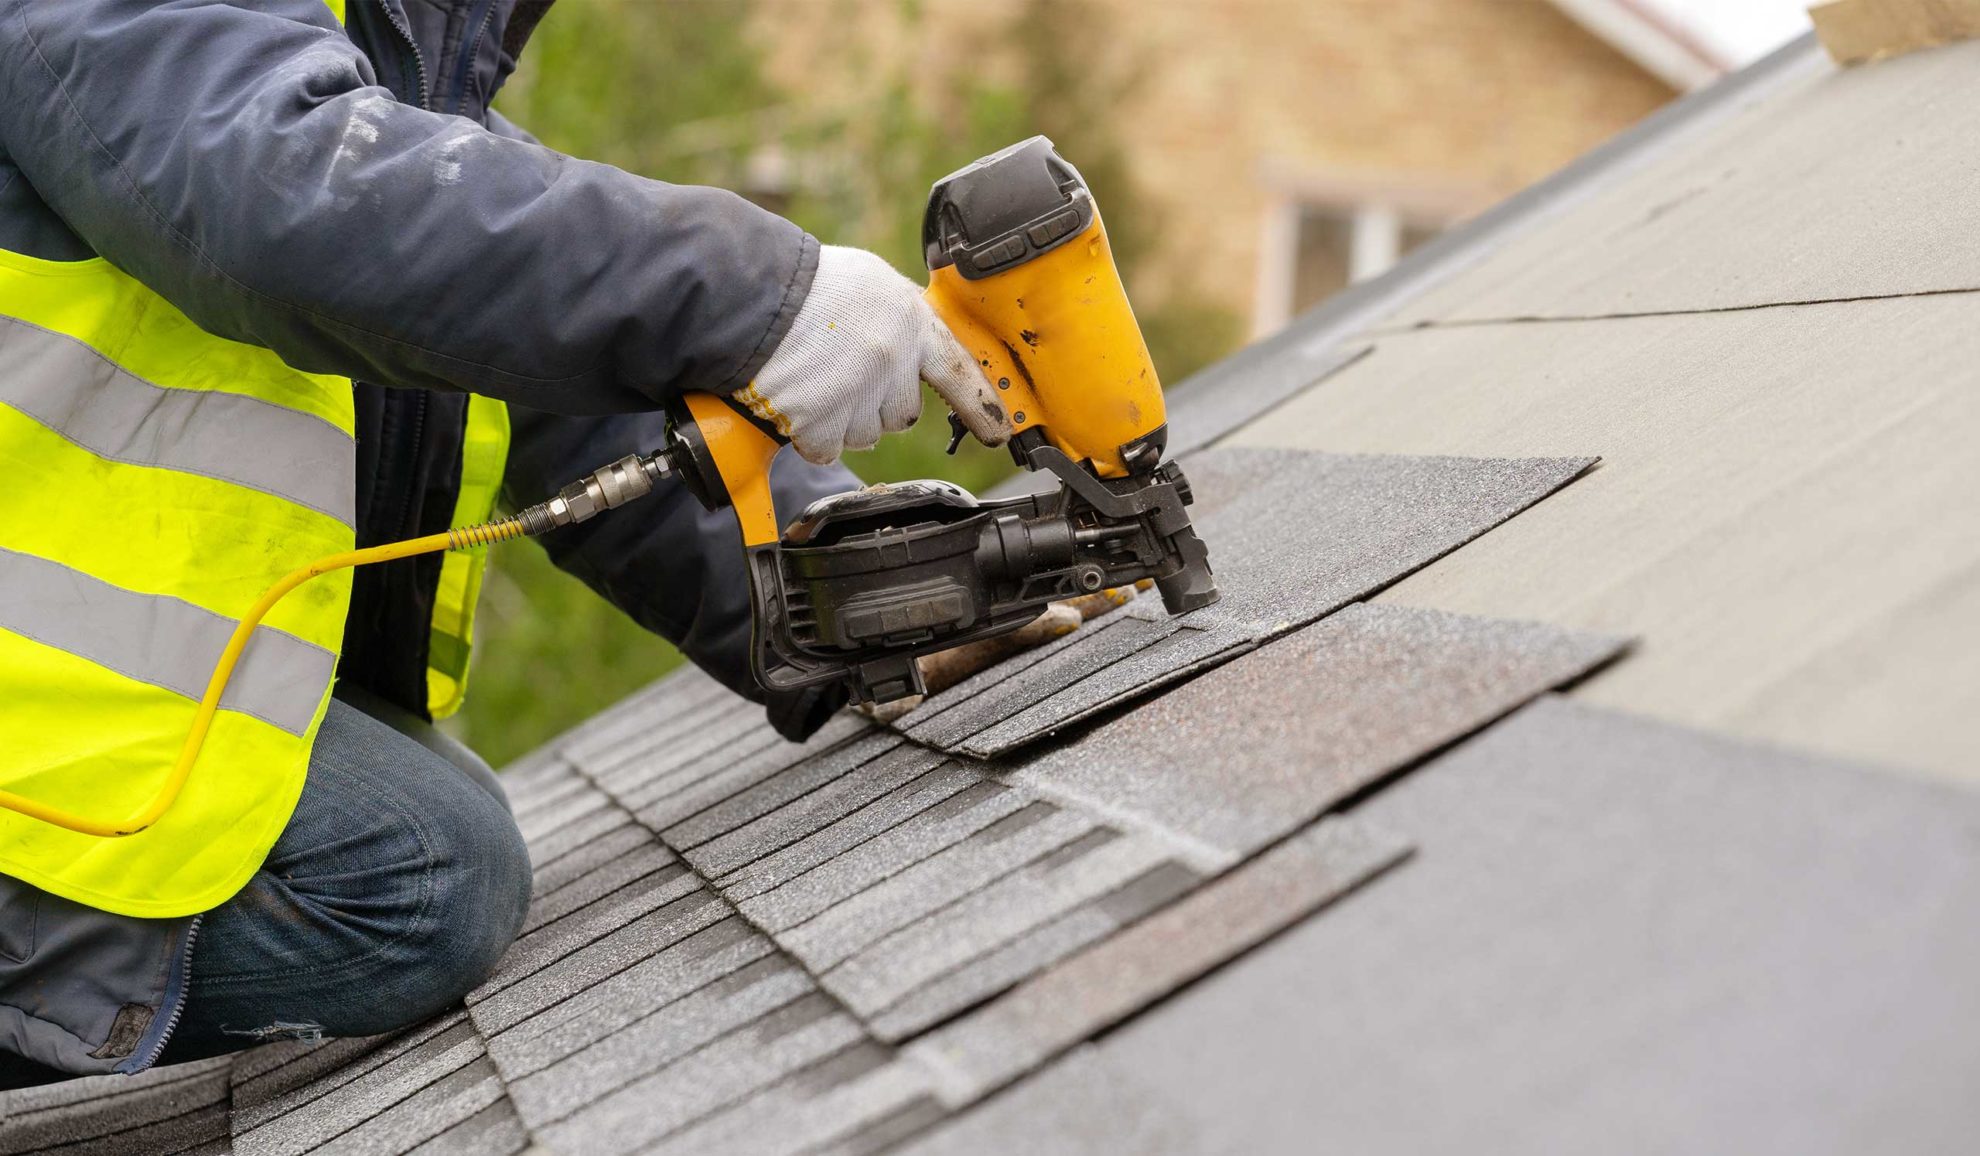 contractor-hands-with-protection-gloves-and-nailgun-installing-asphalt-shingles-taylorsville-nc